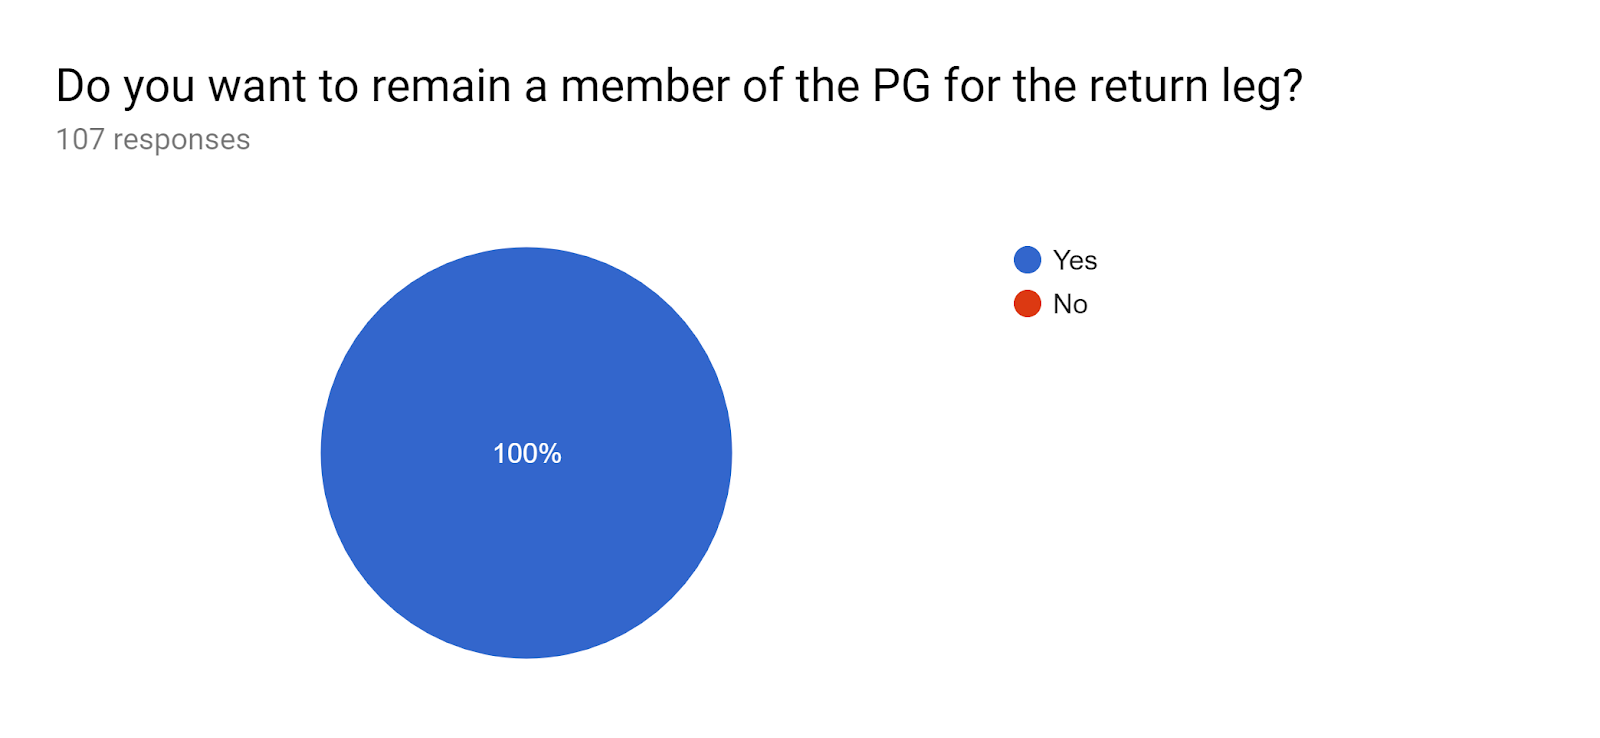 Forms response chart. Question title: Do you want to remain a member of the PG for the return leg?. Number of responses: 107 responses.